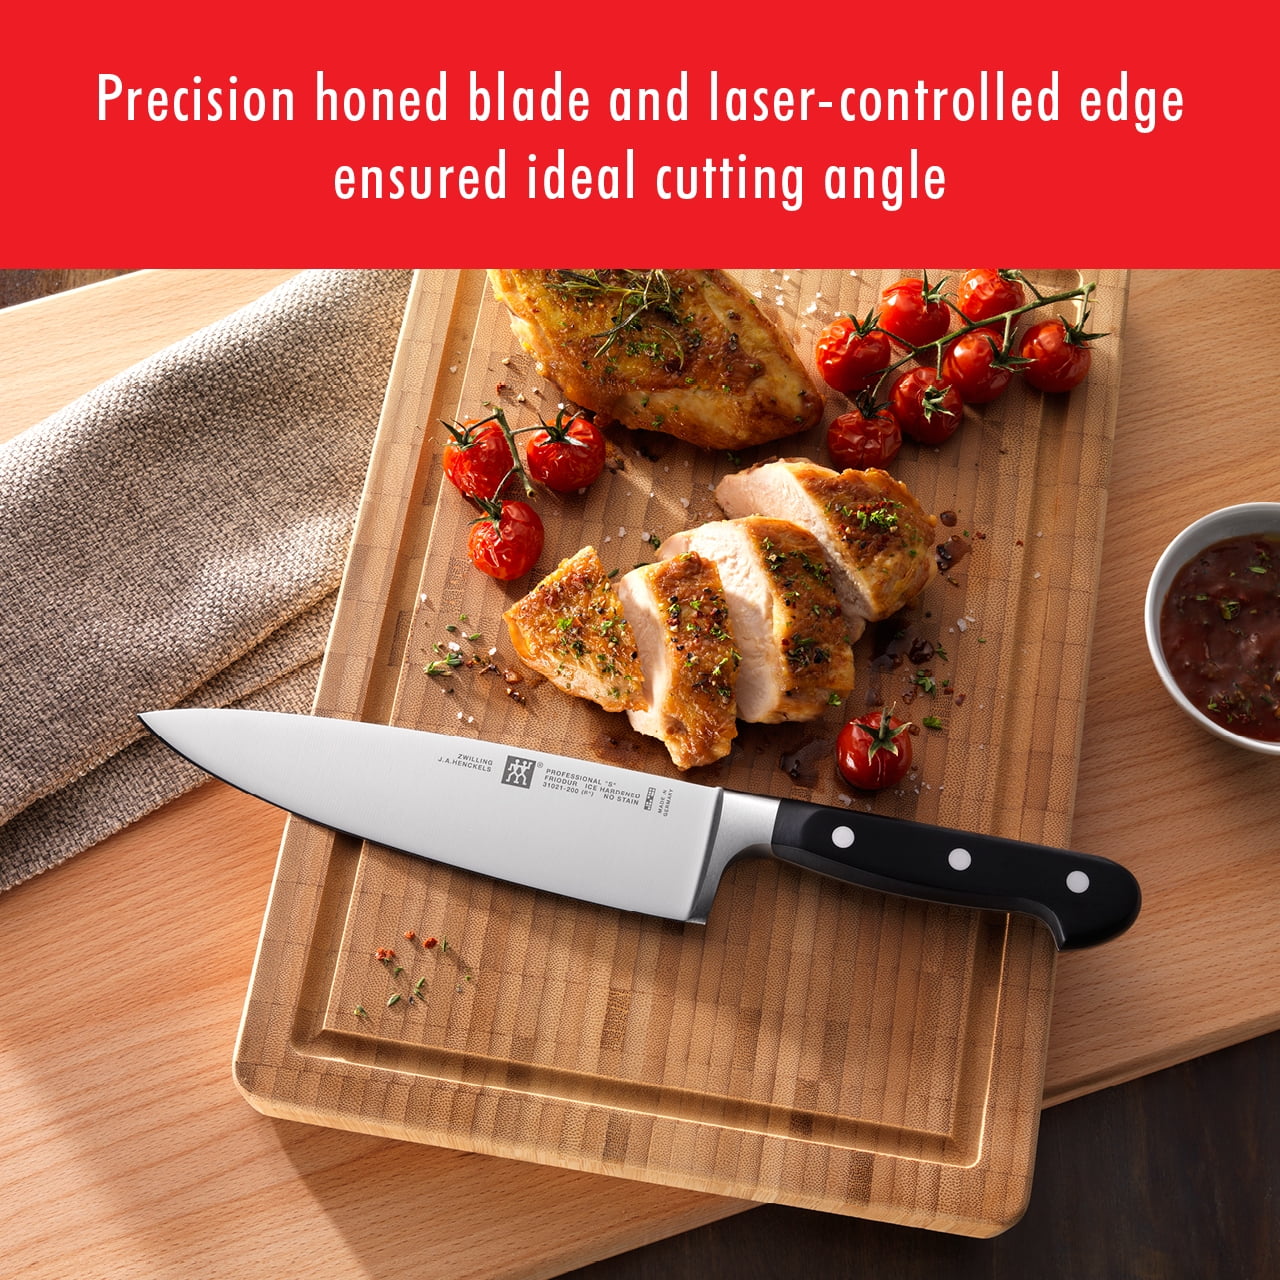 Buy ZWILLING Professional S Chef's knife